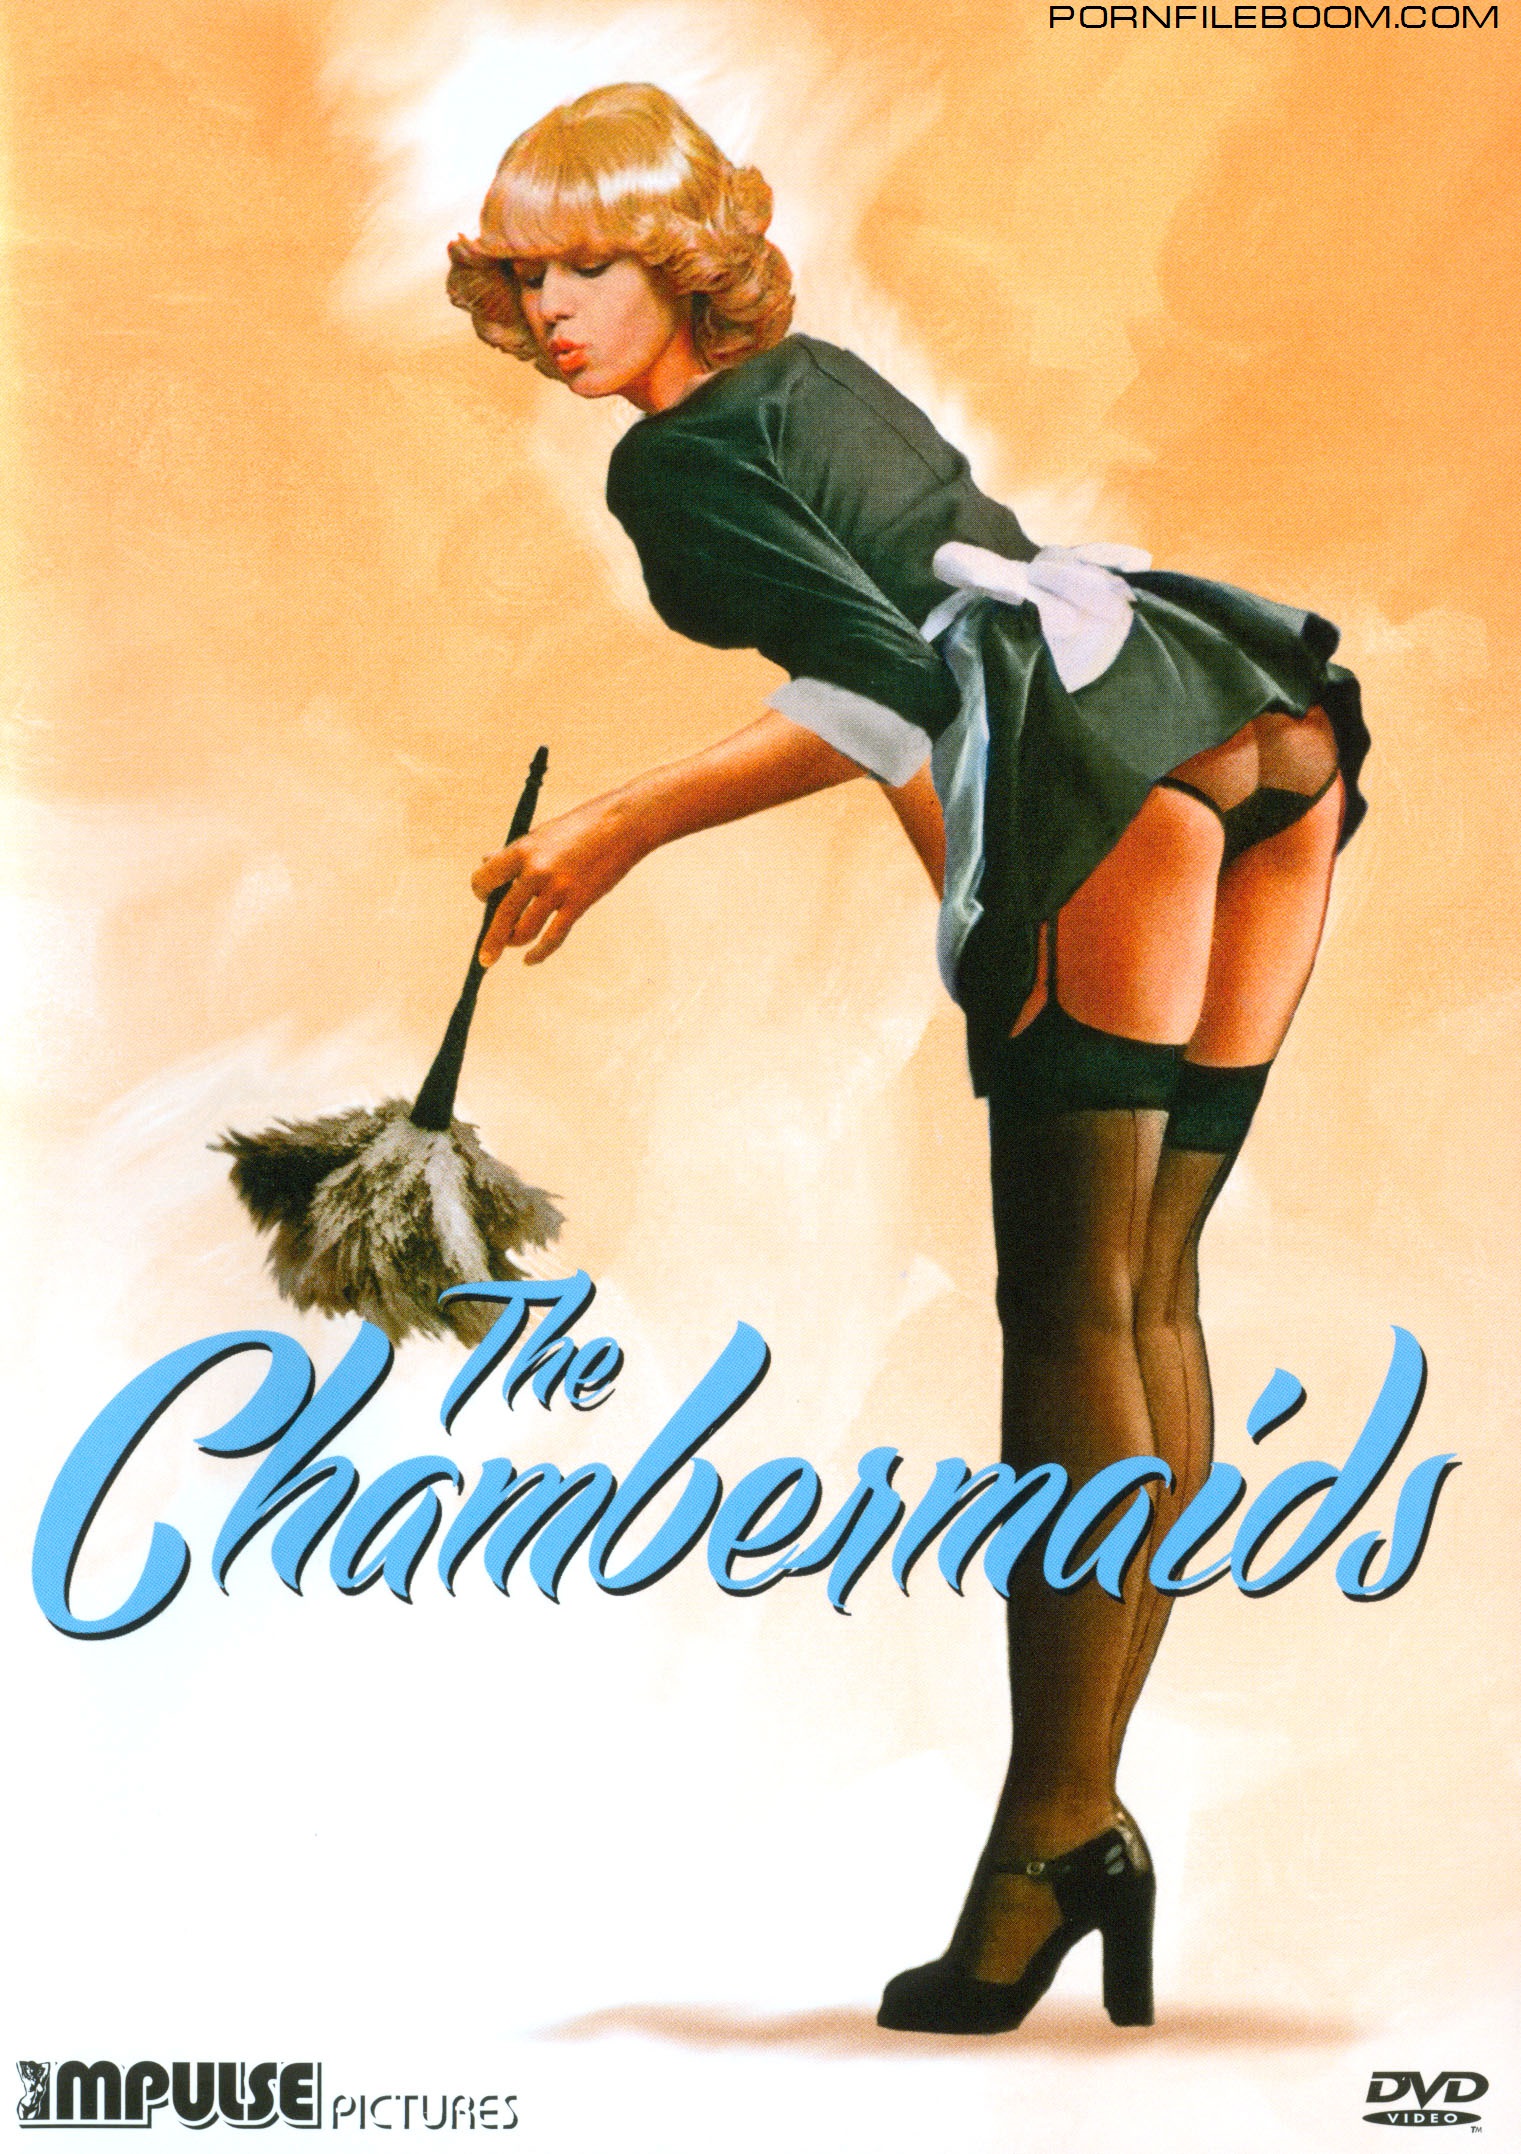 Chambermaids   (Impulse Pictures) [1974, All Sex,Classic, DVDRip]